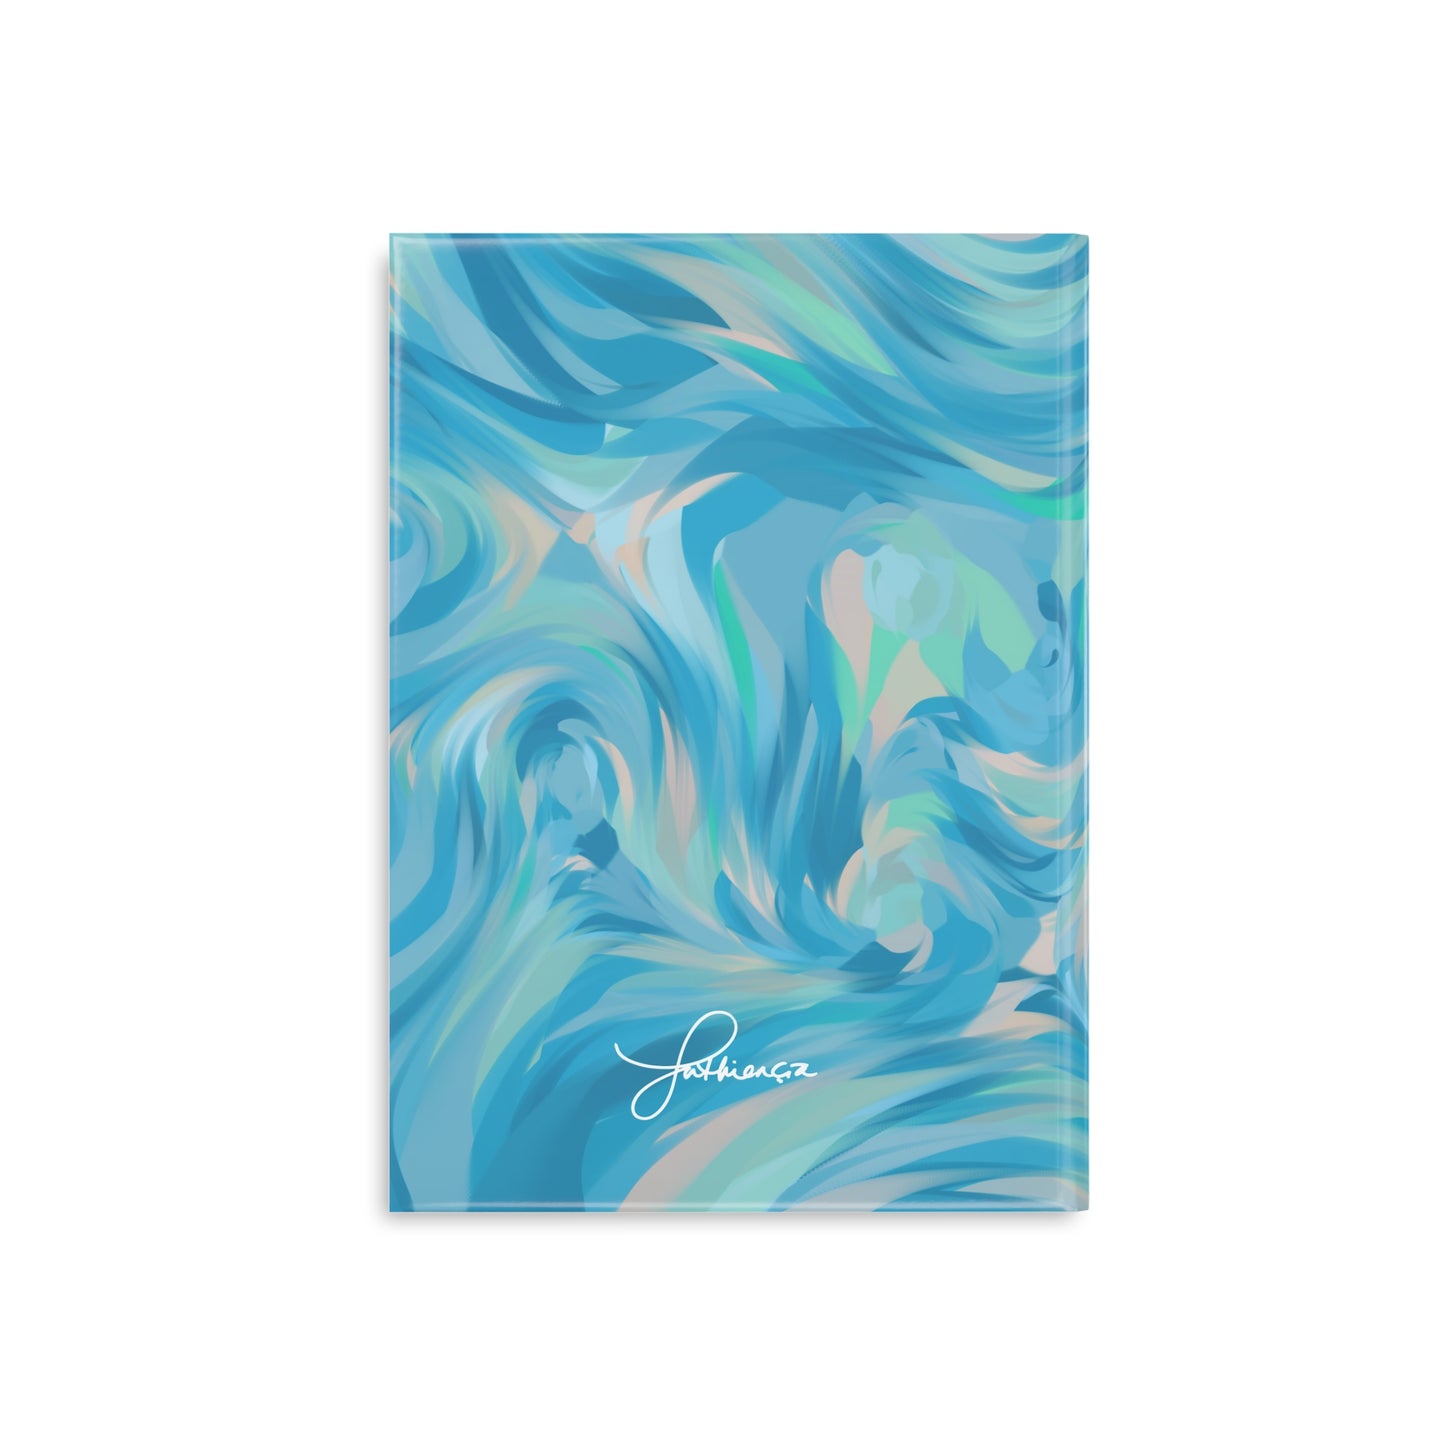 Dlo Fré (Freshwater Notebook)